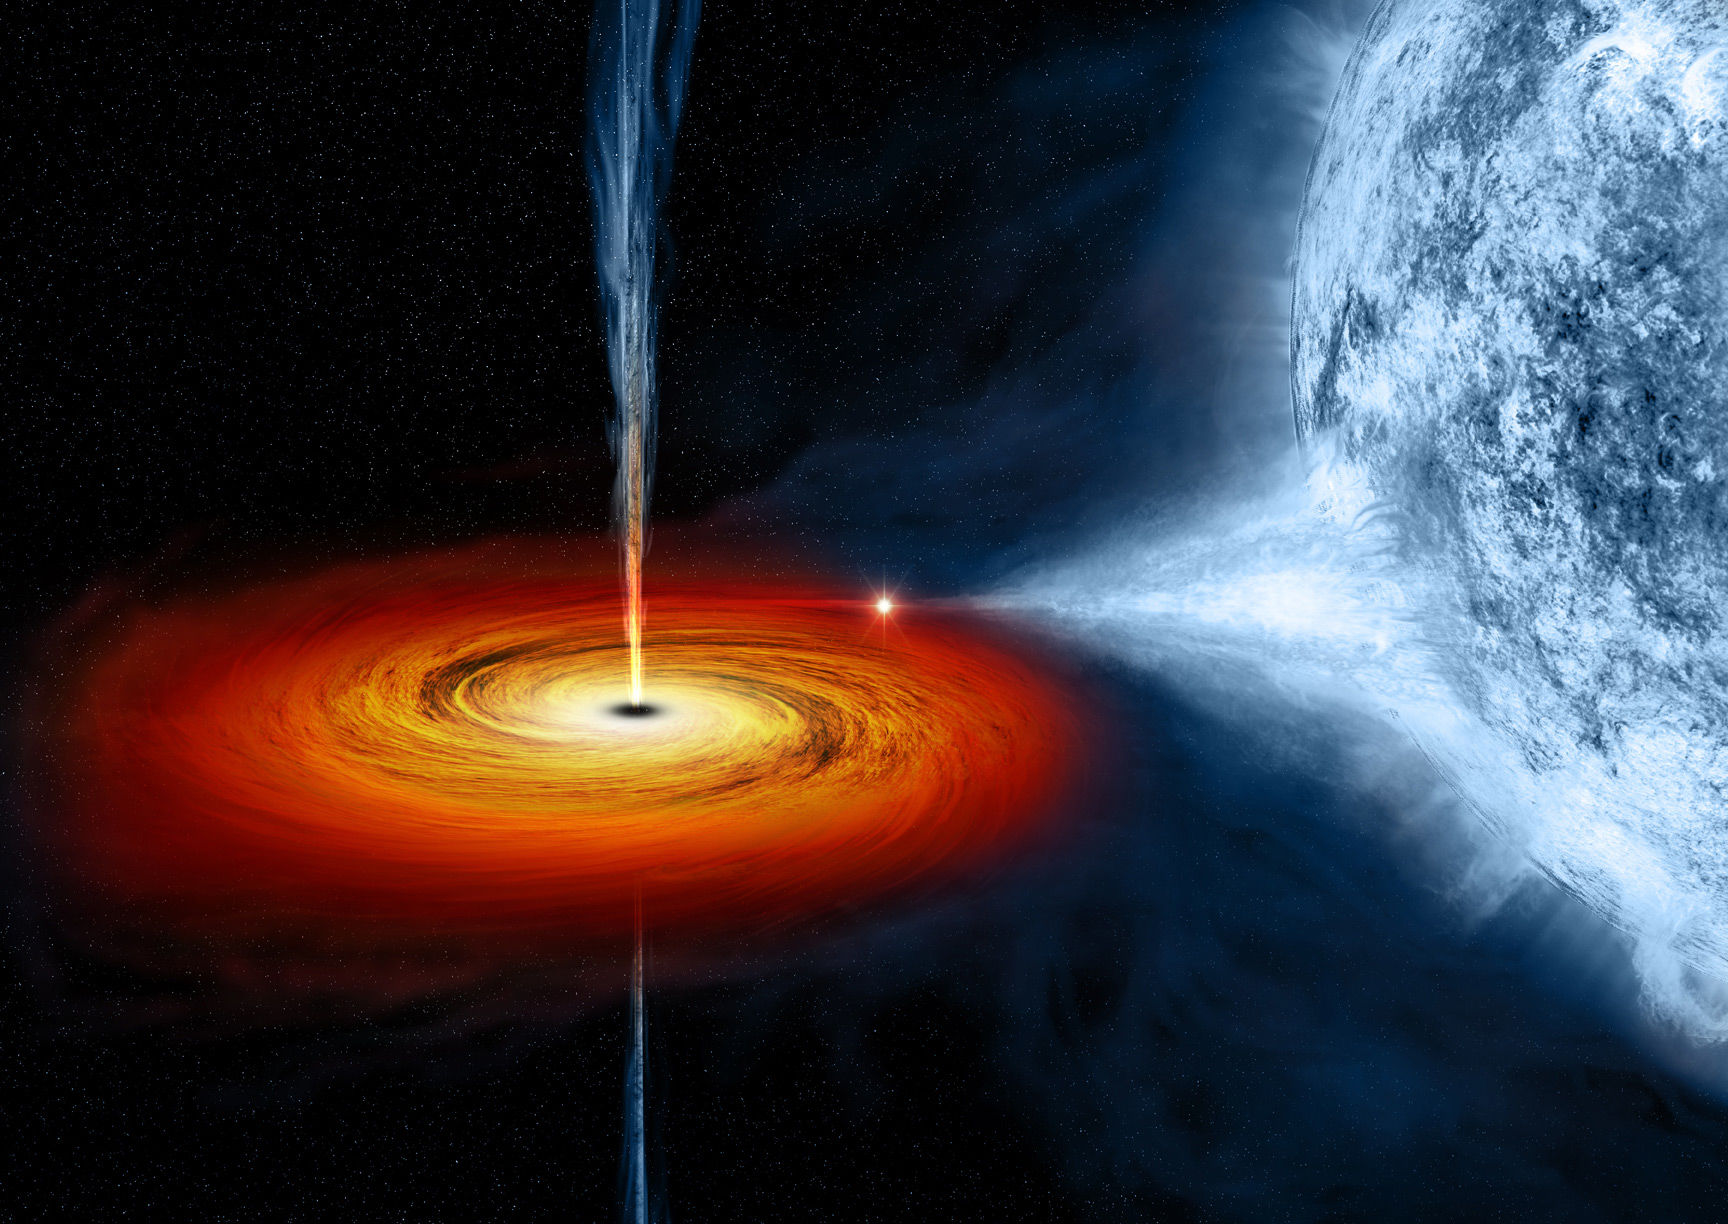 The Death of Black Holes